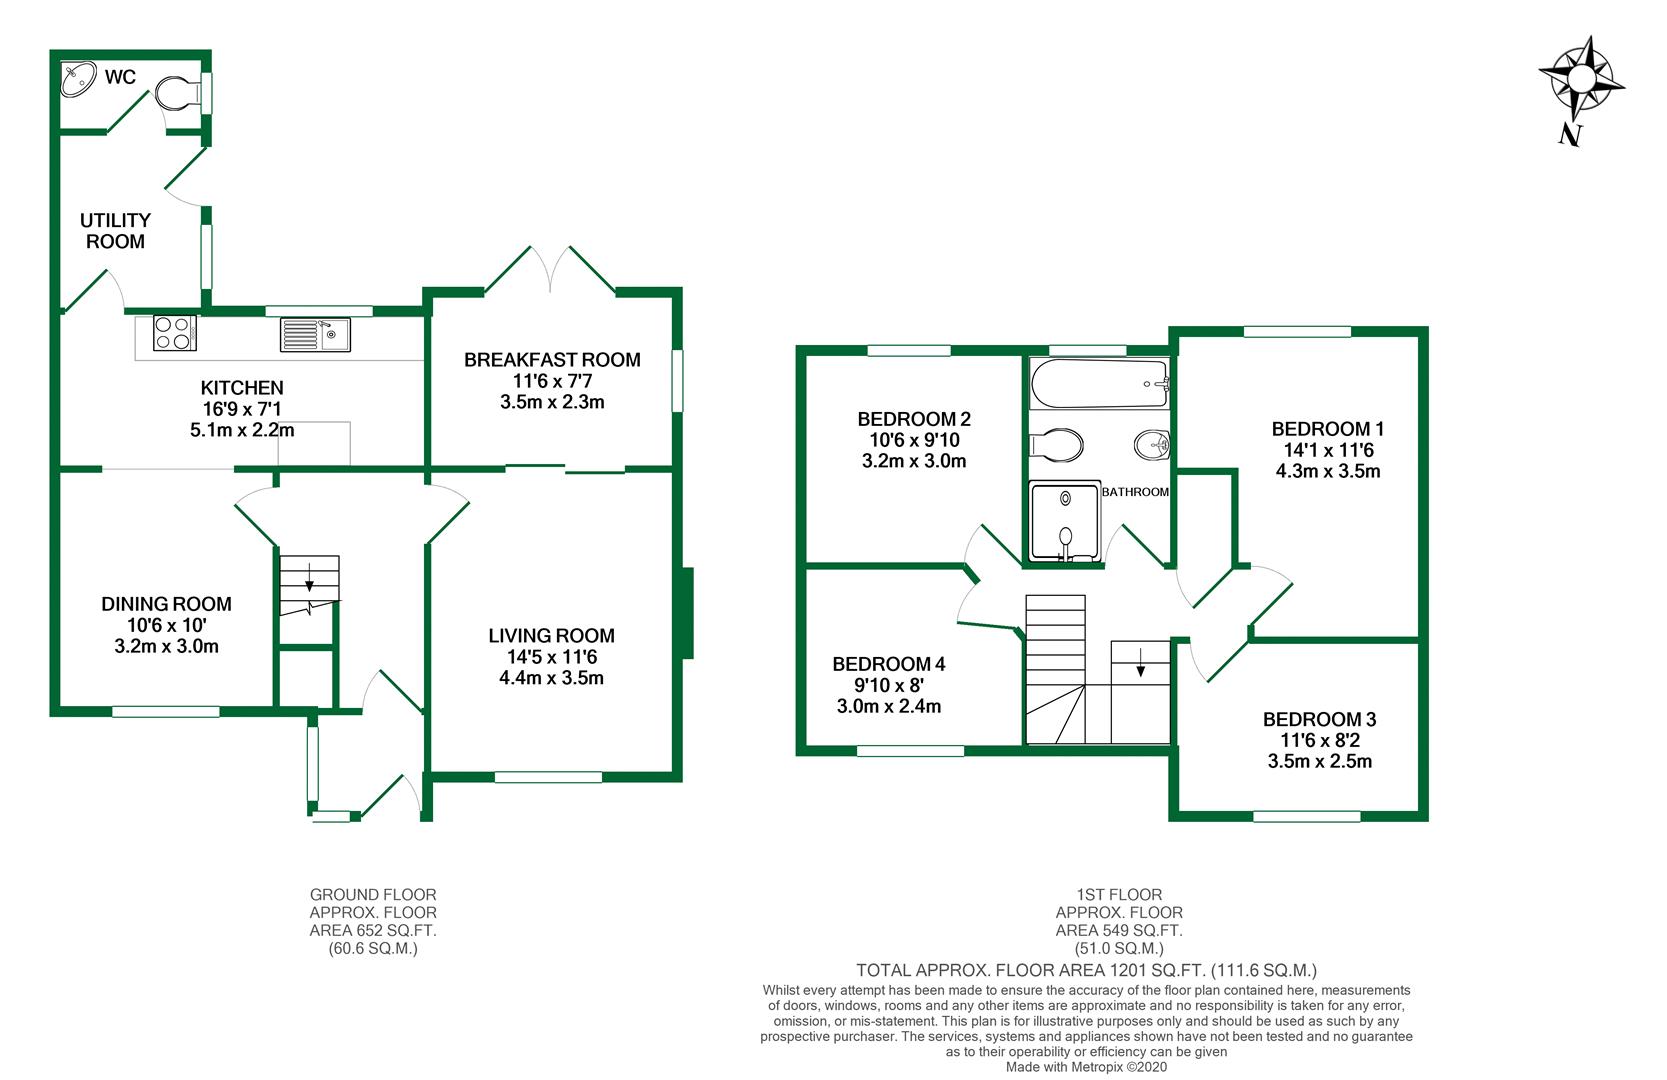 Floorplans For Milley Road, Waltham St Lawrence, Reading